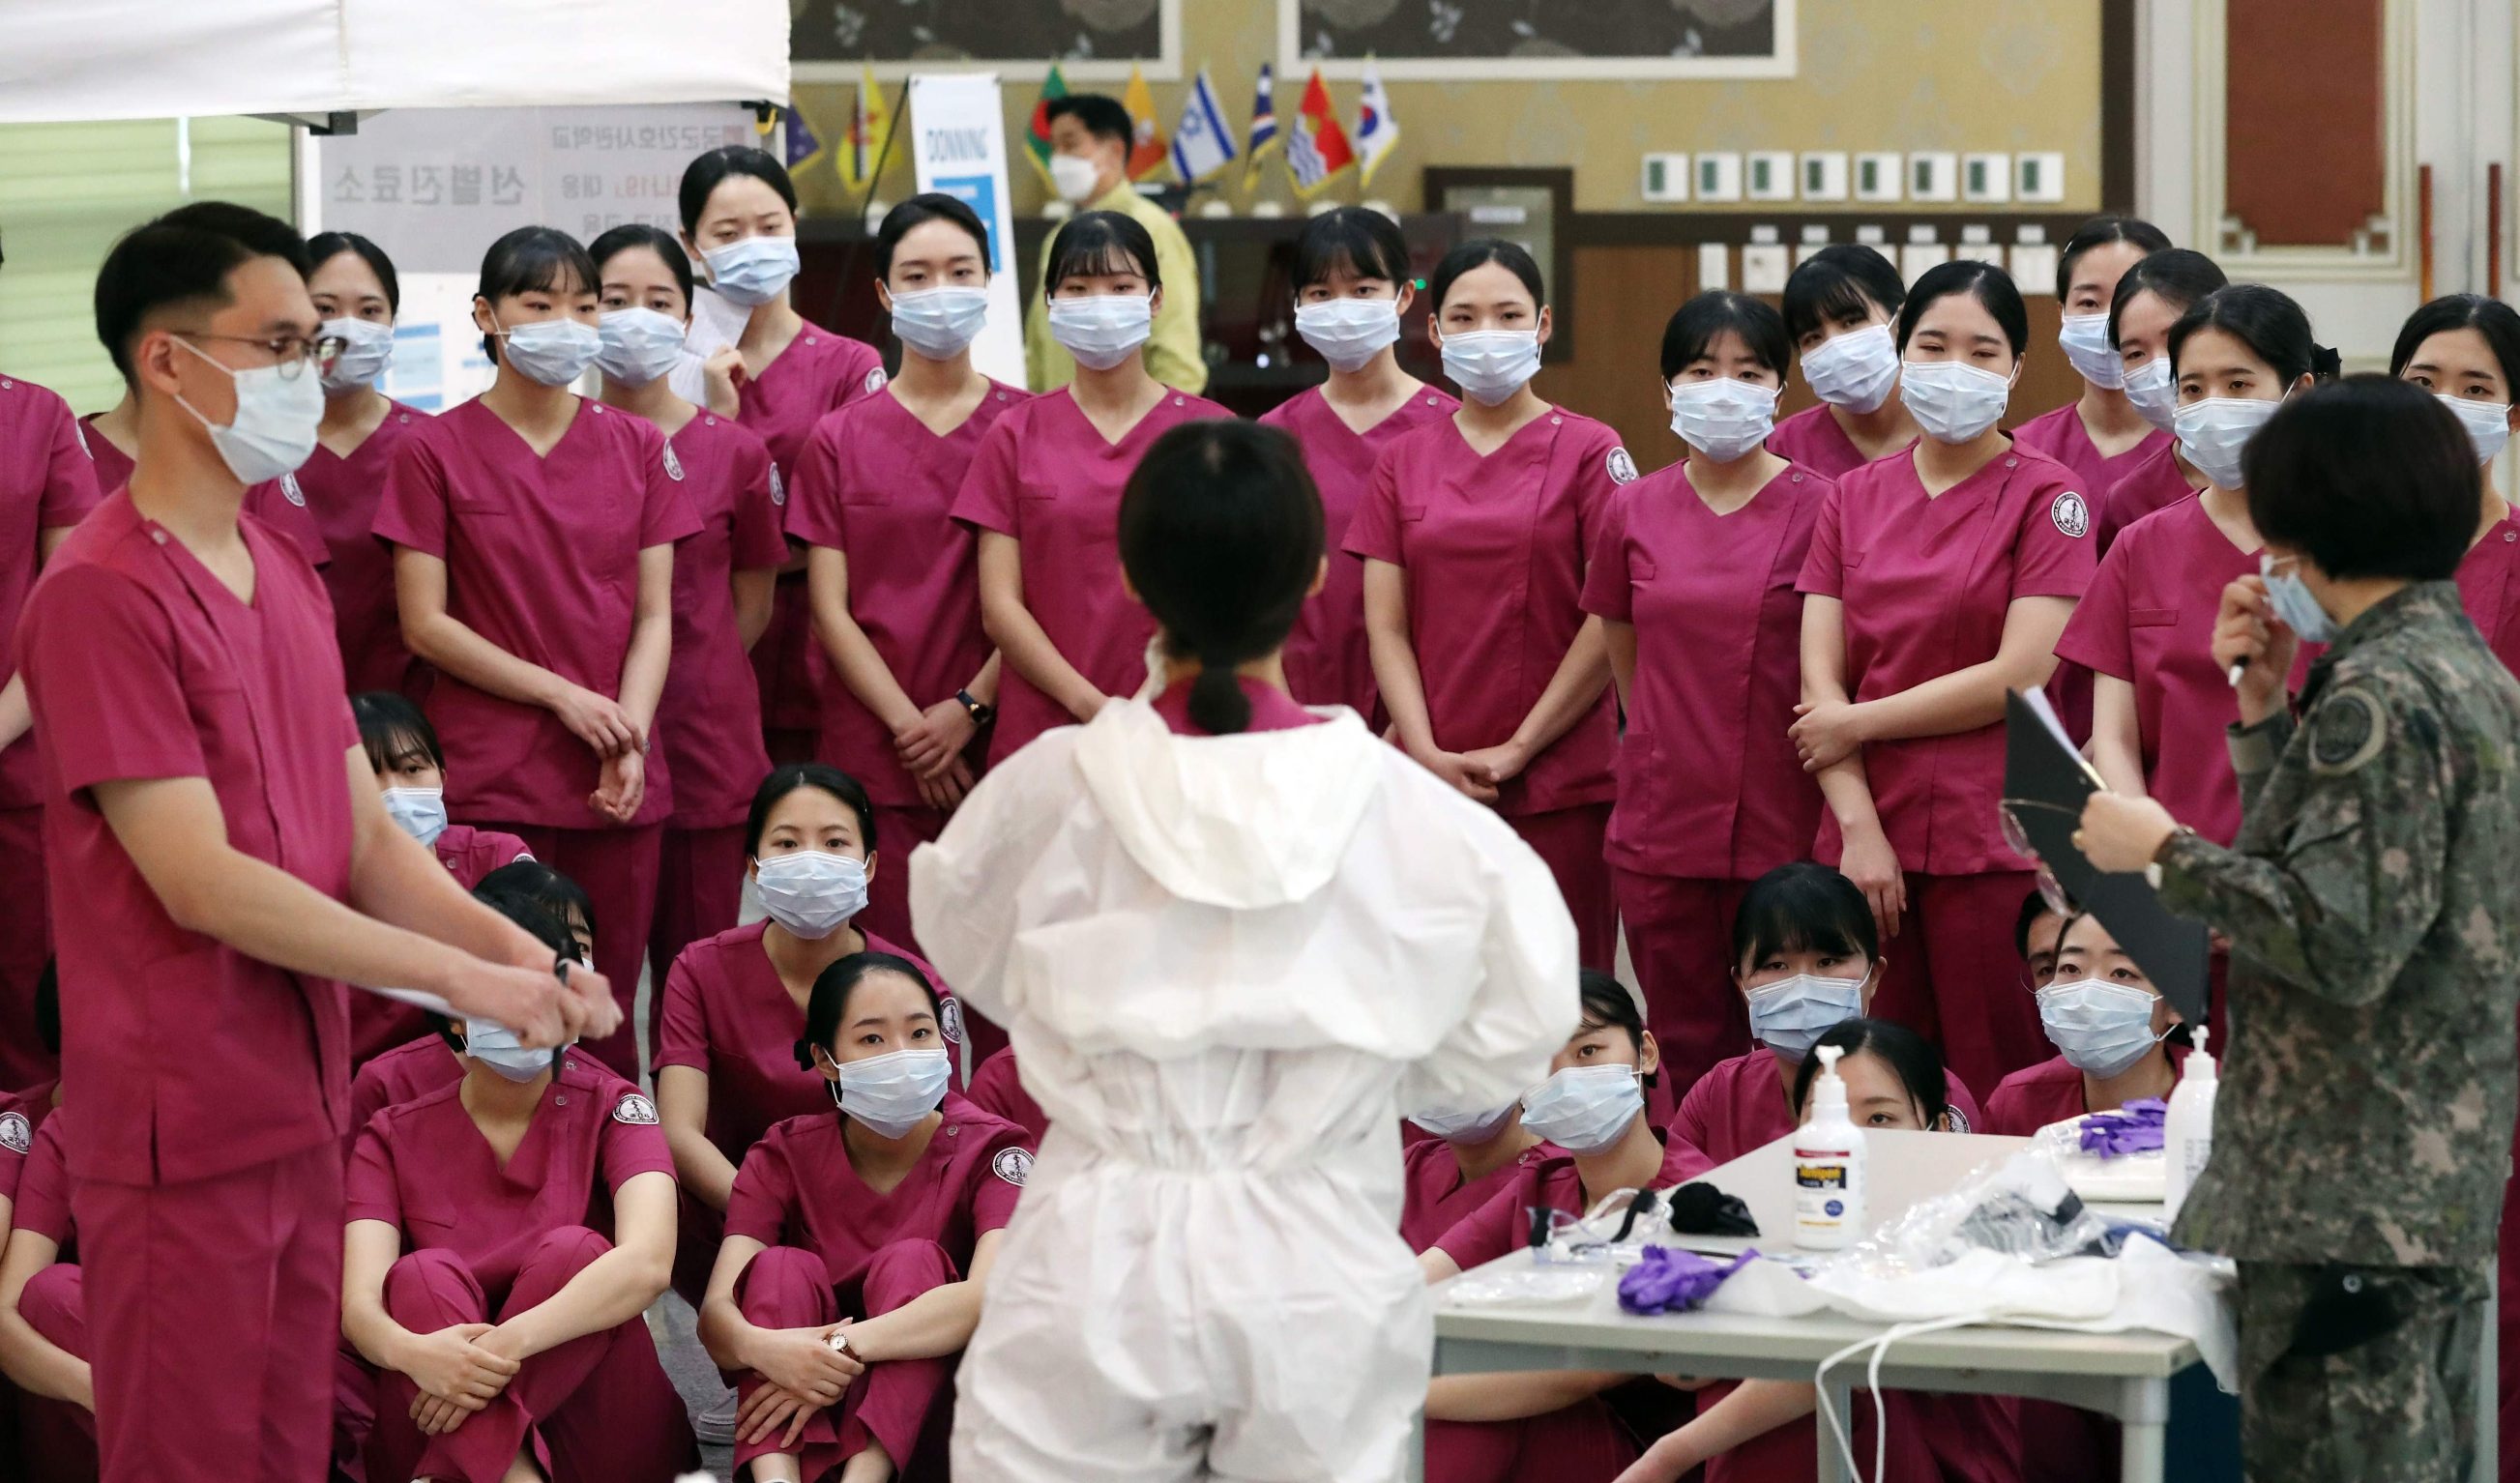 New nurse officers are trained on the COVID-19 coronavirus before heading to Daegu to help medical staff, at the Korea Armed Forces Nursing Academy in Daejeon on March 2, 2020. - South Korea confirmed 599 new coronavirus cases on March 2, taking the total to 4,335, health authorities said, while the death toll rose by eight to 26. (Photo by - / YONHAP / AFP) / - South Korea OUT / REPUBLIC OF KOREA OUT  NO ARCHIVES  RESTRICTED TO SUBSCRIPTION USE